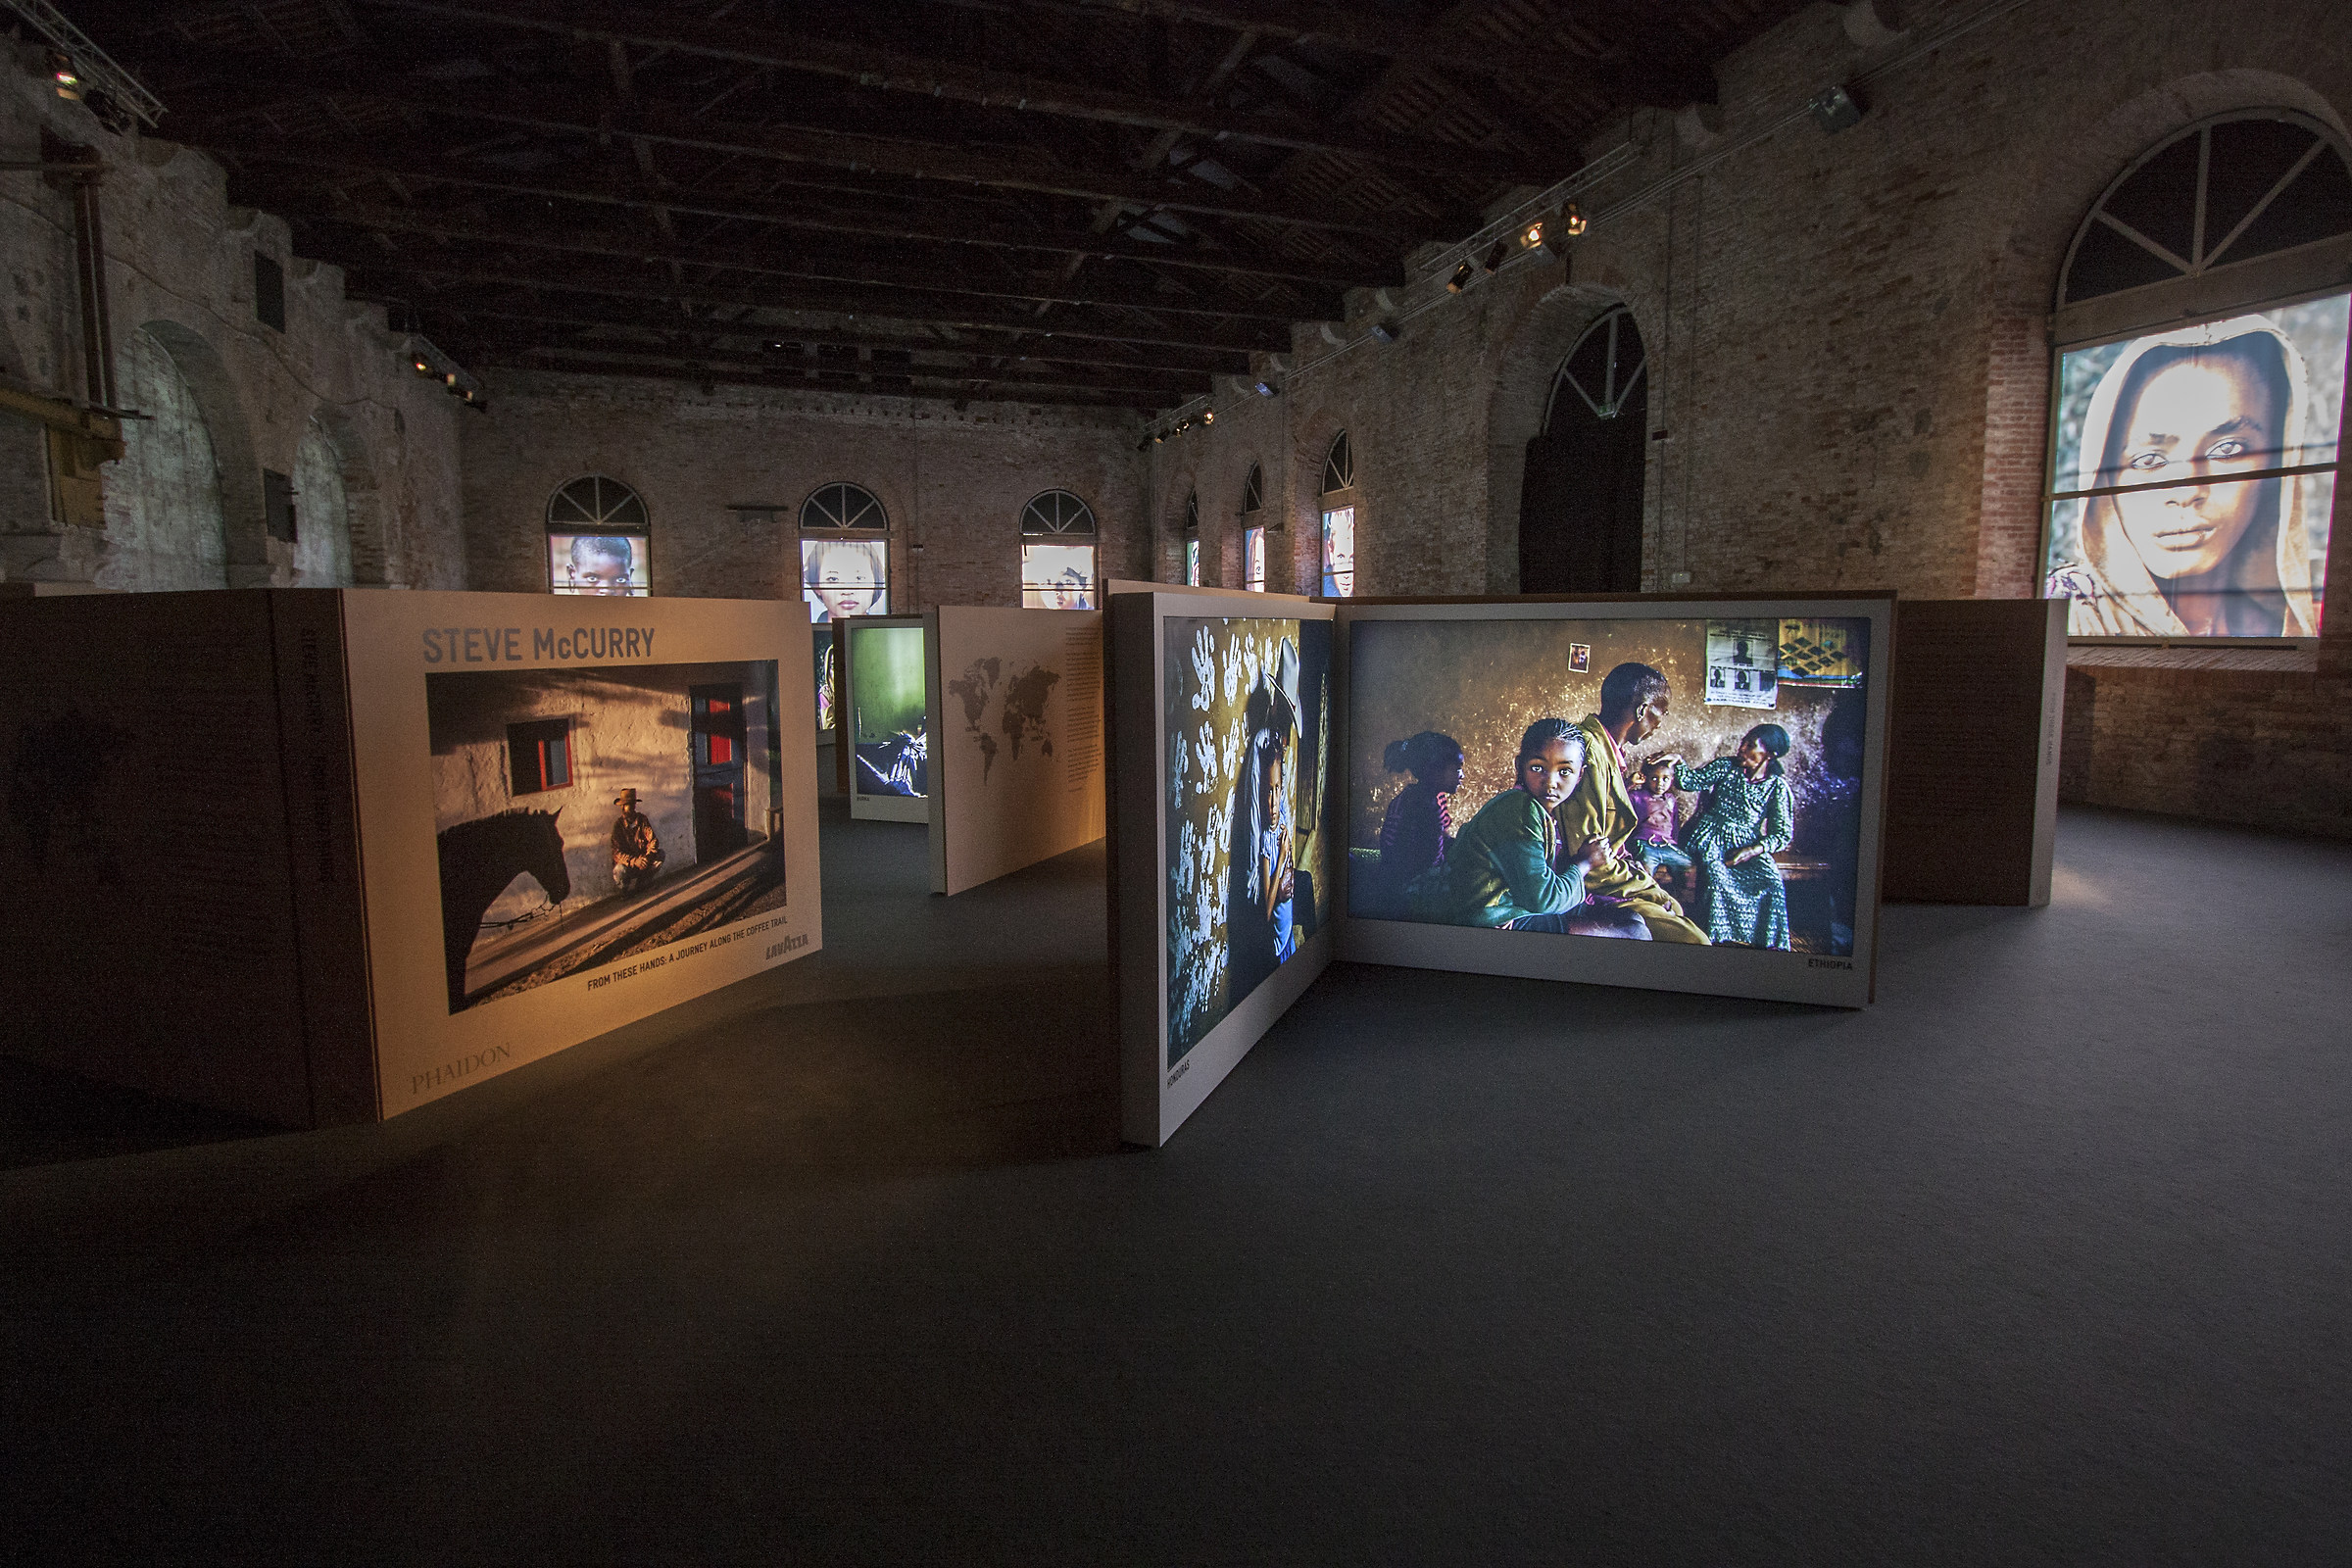 Steve McCurry exhibition in Venice - stand...